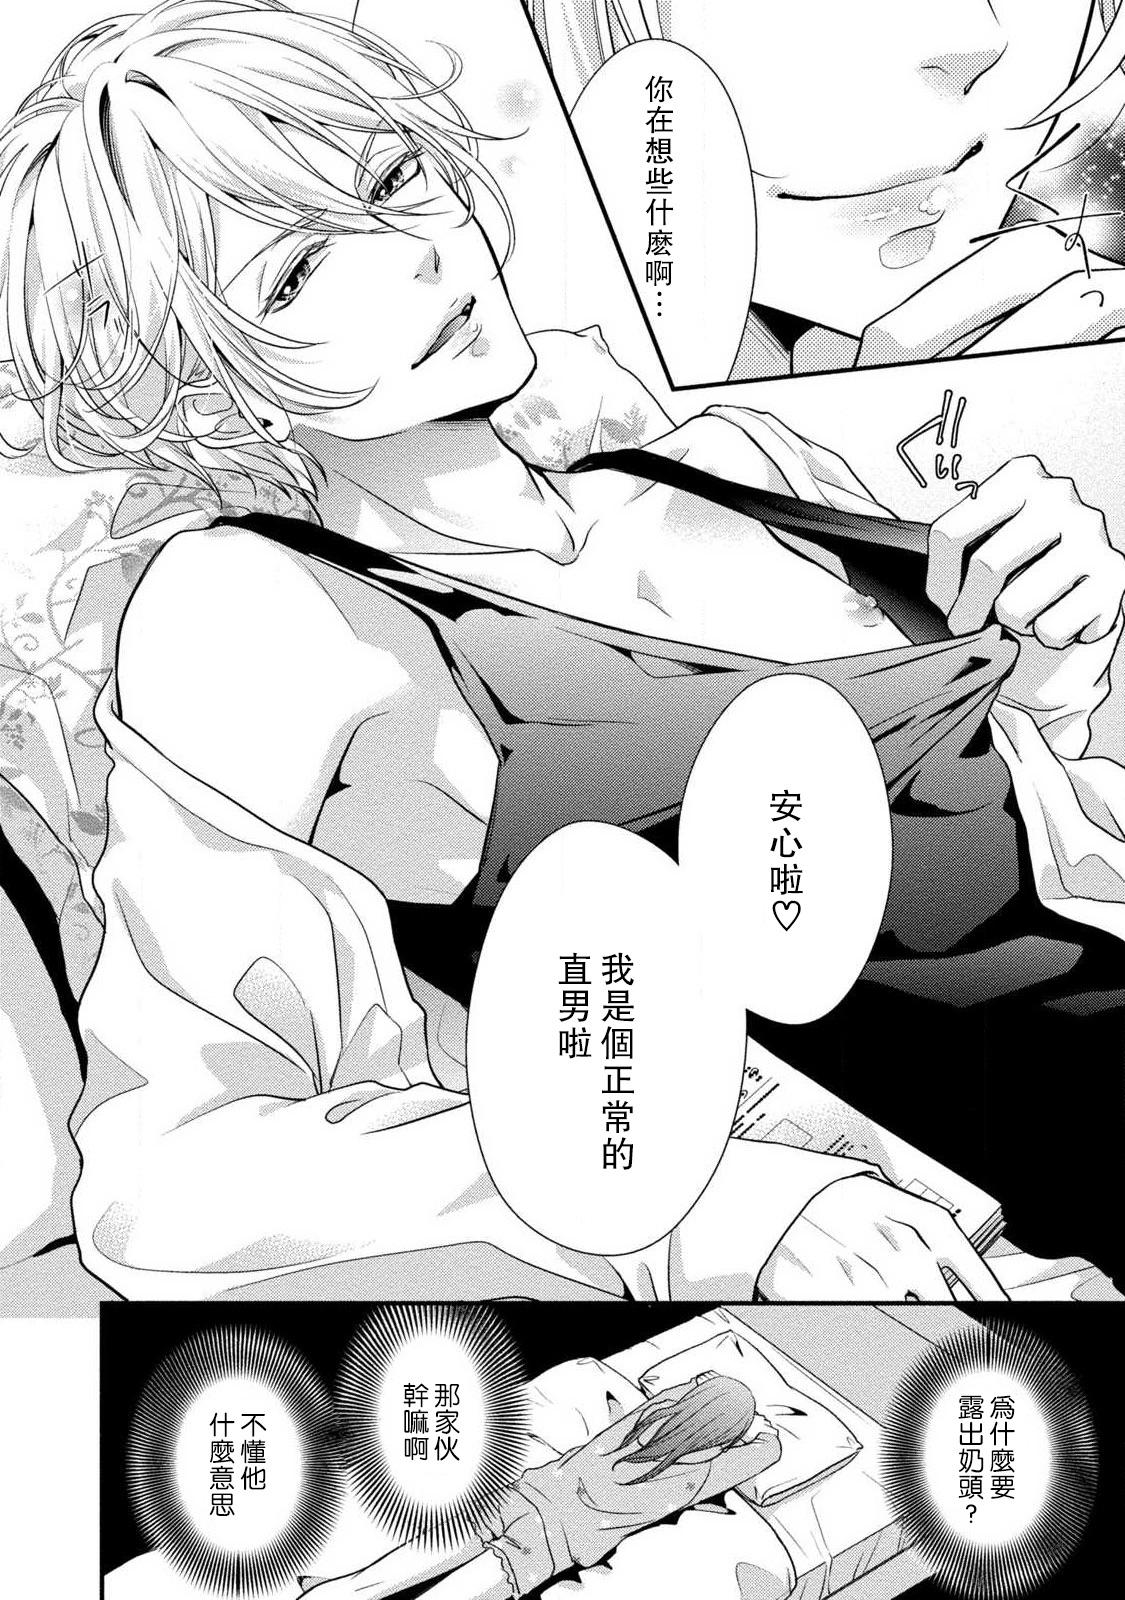 Pau If my brother's friend was a male of exposure | 哥哥的朋友是露出系男子 Three Some - Page 10